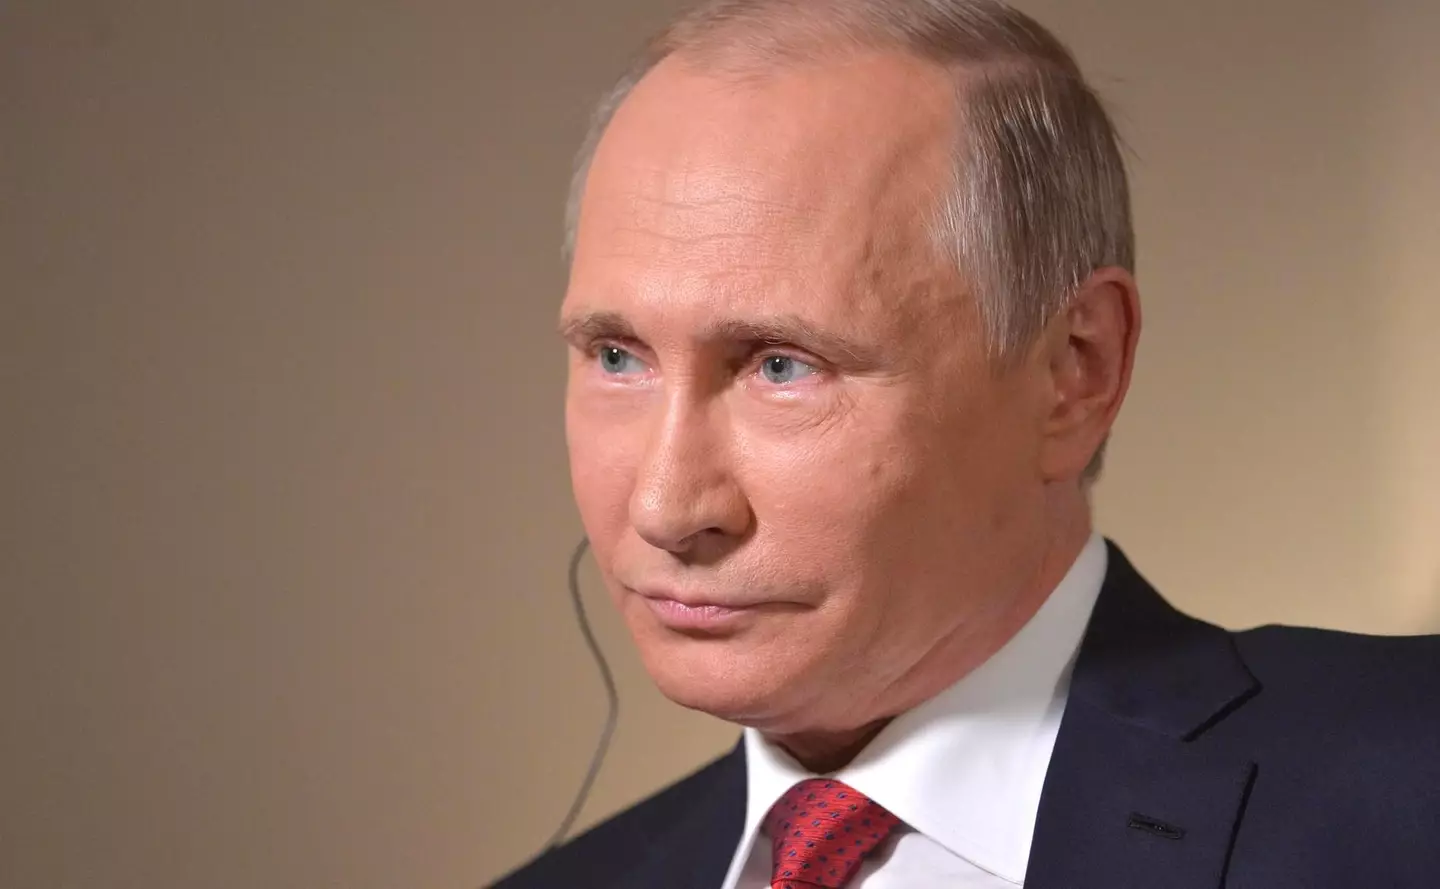 Putin has said an intercontinental ballistic missile launched in Russia on Wednesday will provide ‘food for thought for those who try to invade’.